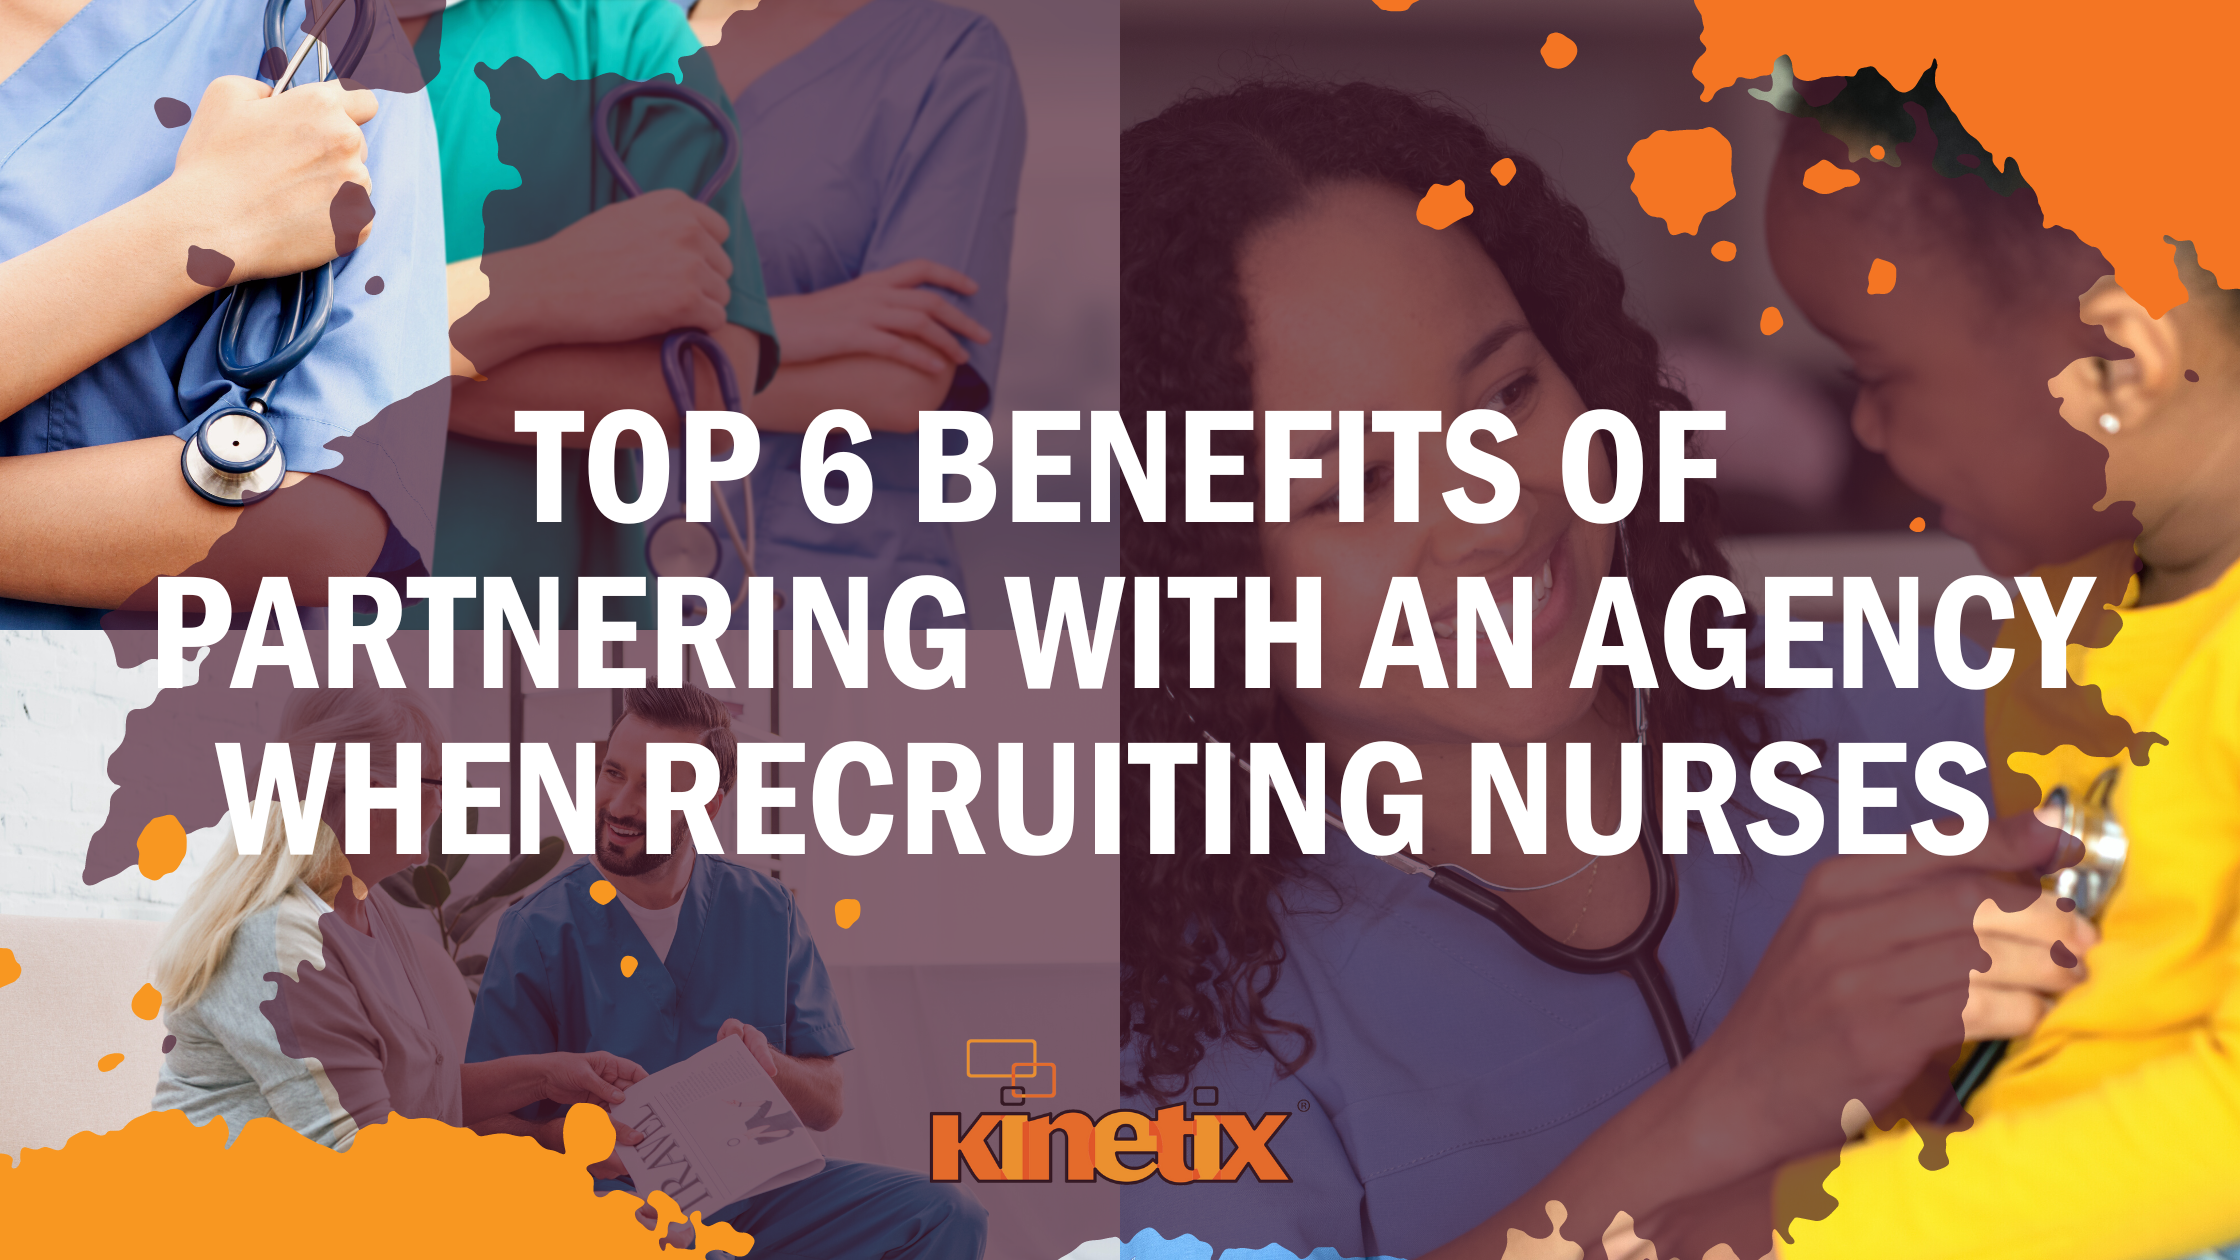 Top 6 Benefits of Partnering With an Agency When Recruiting Nurses